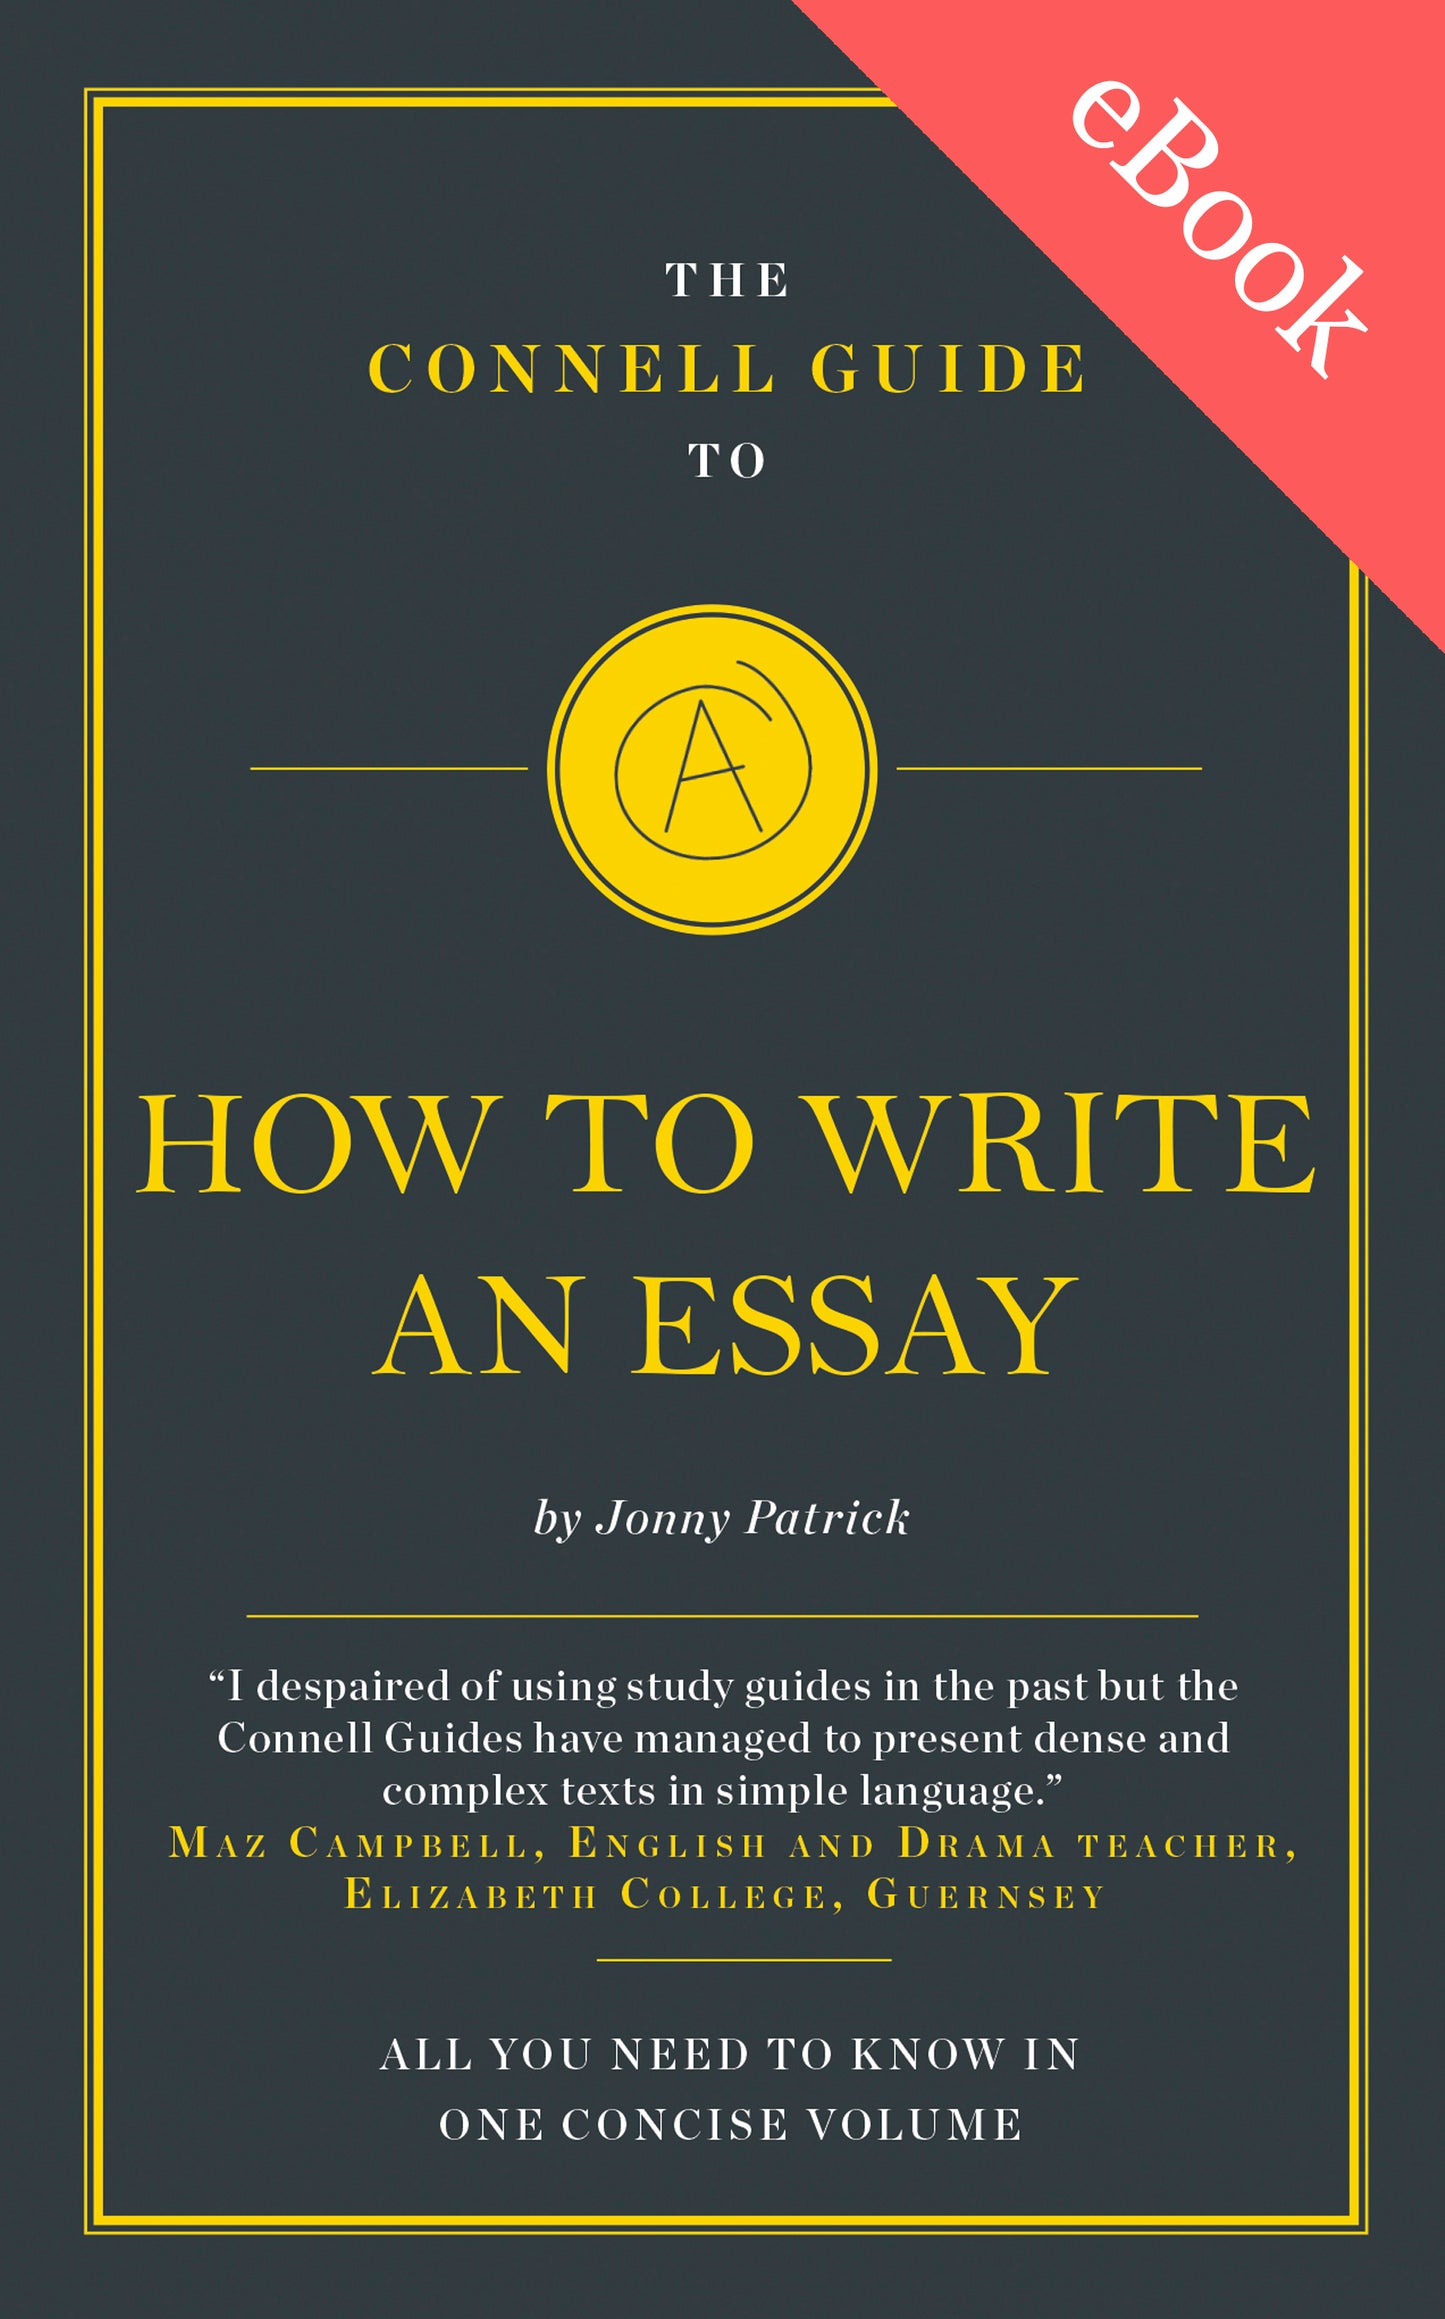 The Connell Guide to How to Write an Essay